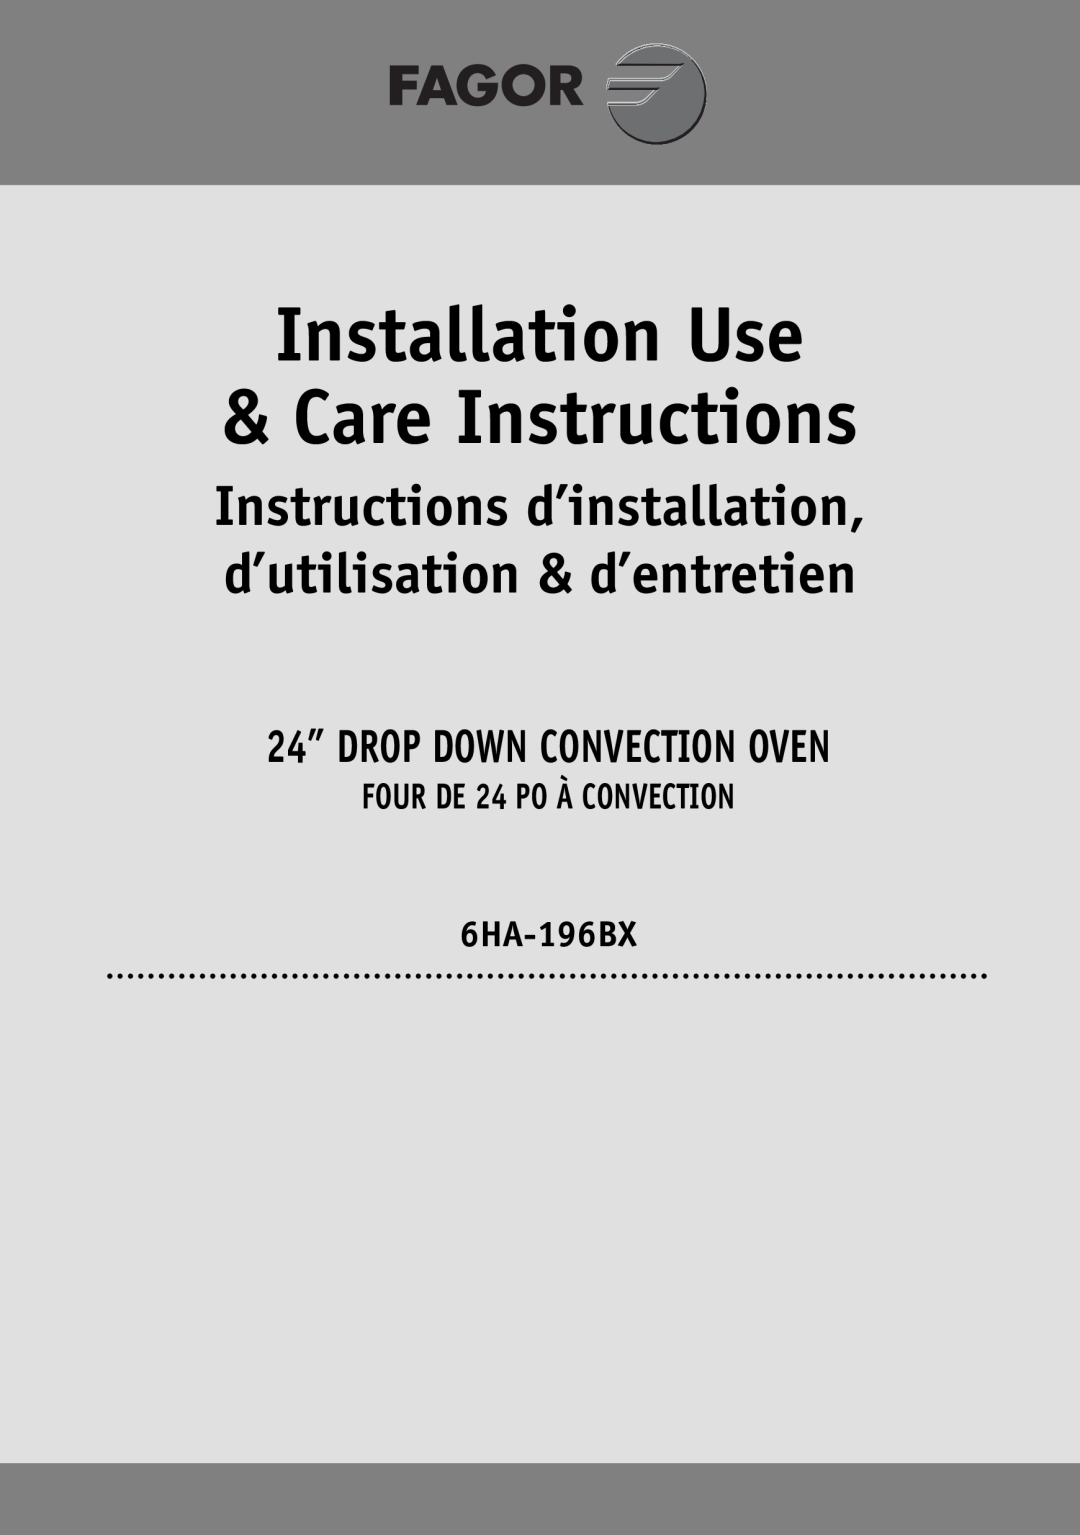 Fagor America 6HA-196BX manual Installation Use Care Instructions, 24” DROP DOWN CONVECTION OVEN 